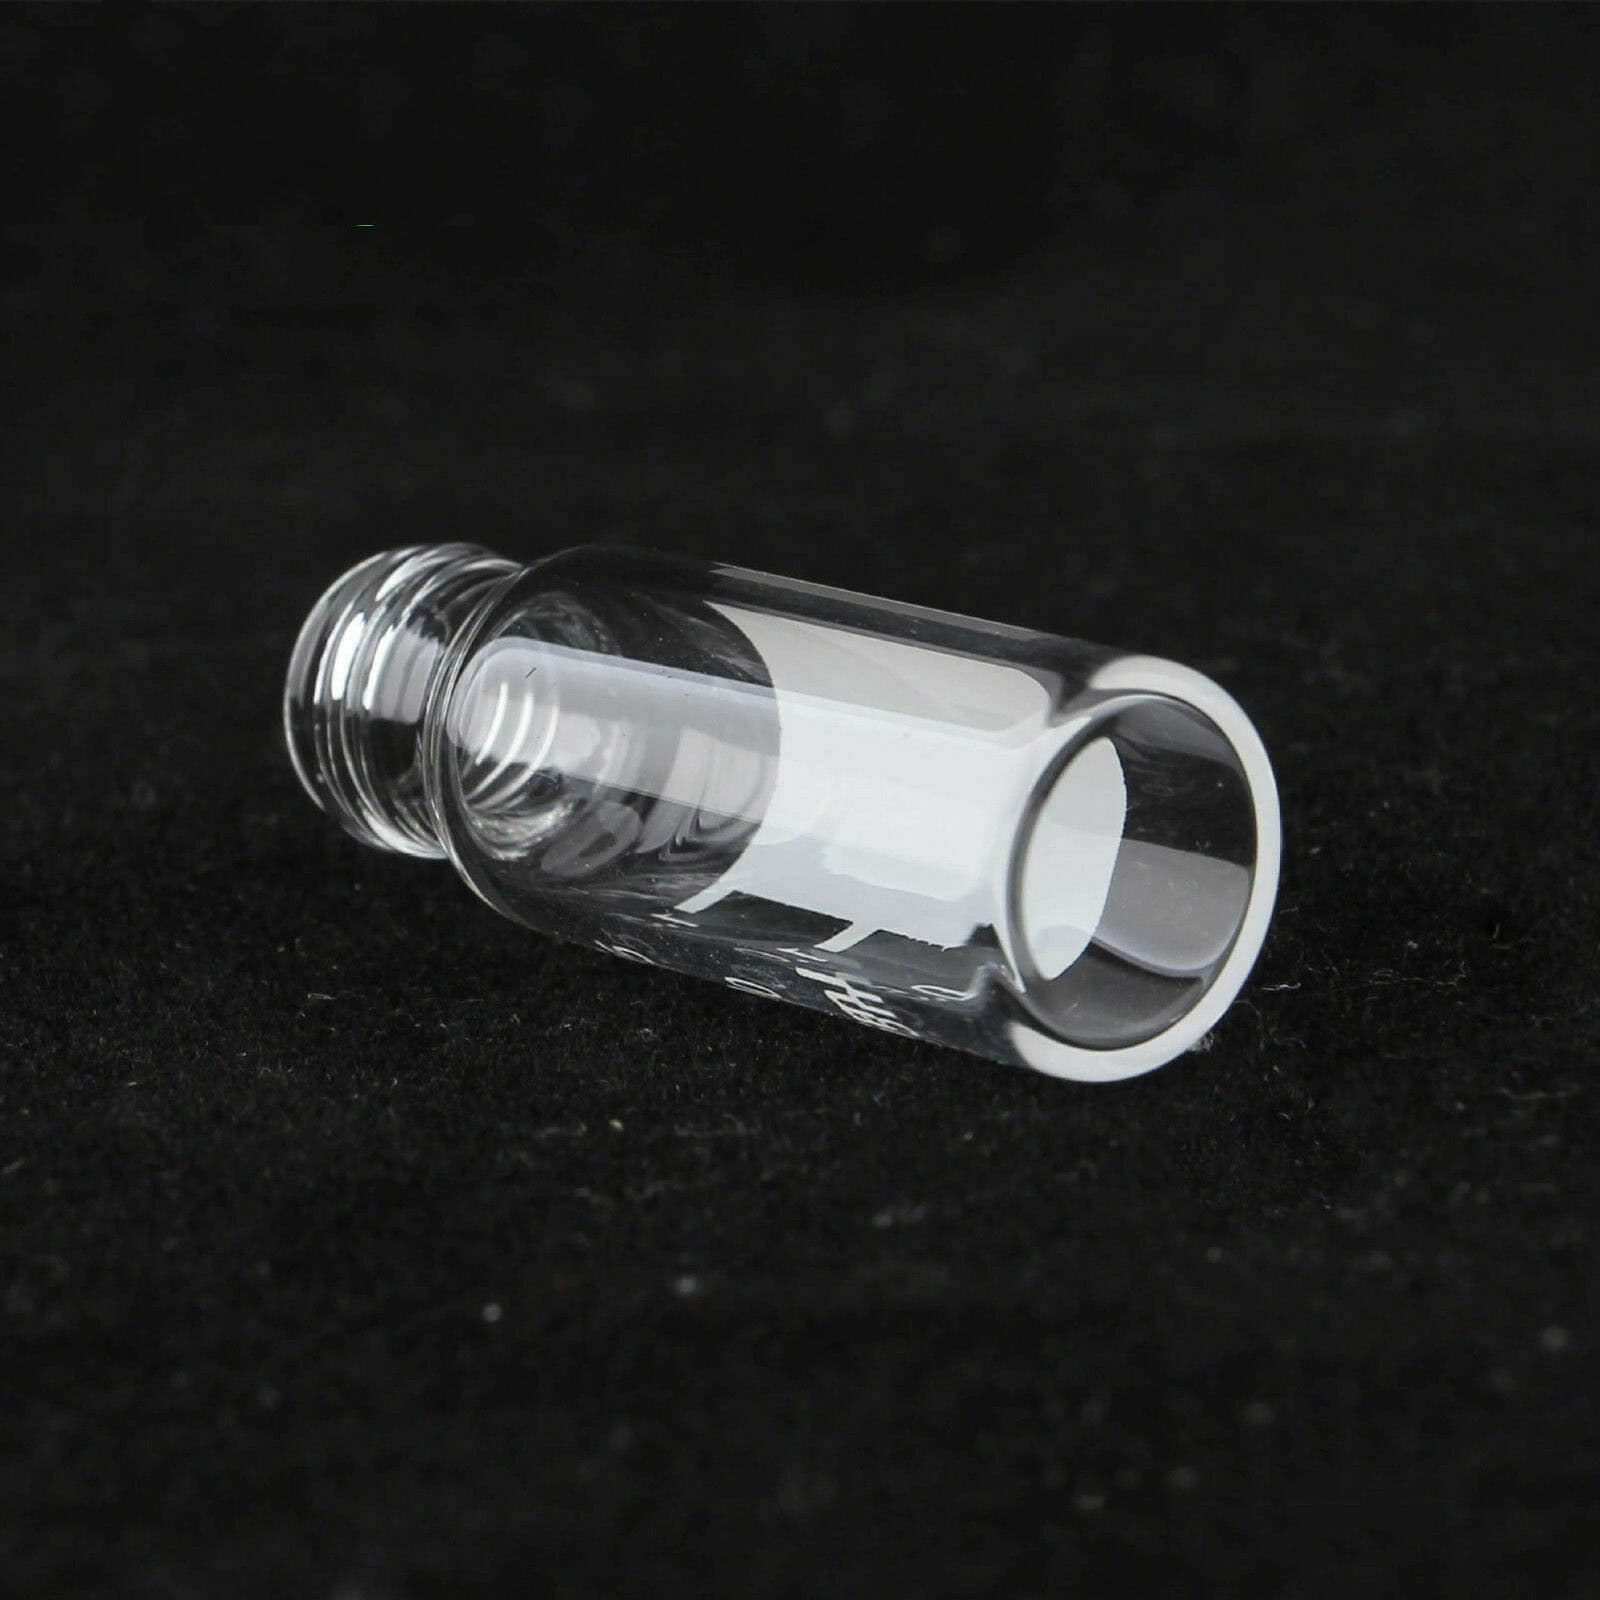 India Wide Opening 2ml hplc 9-425 Glass vial with Cap